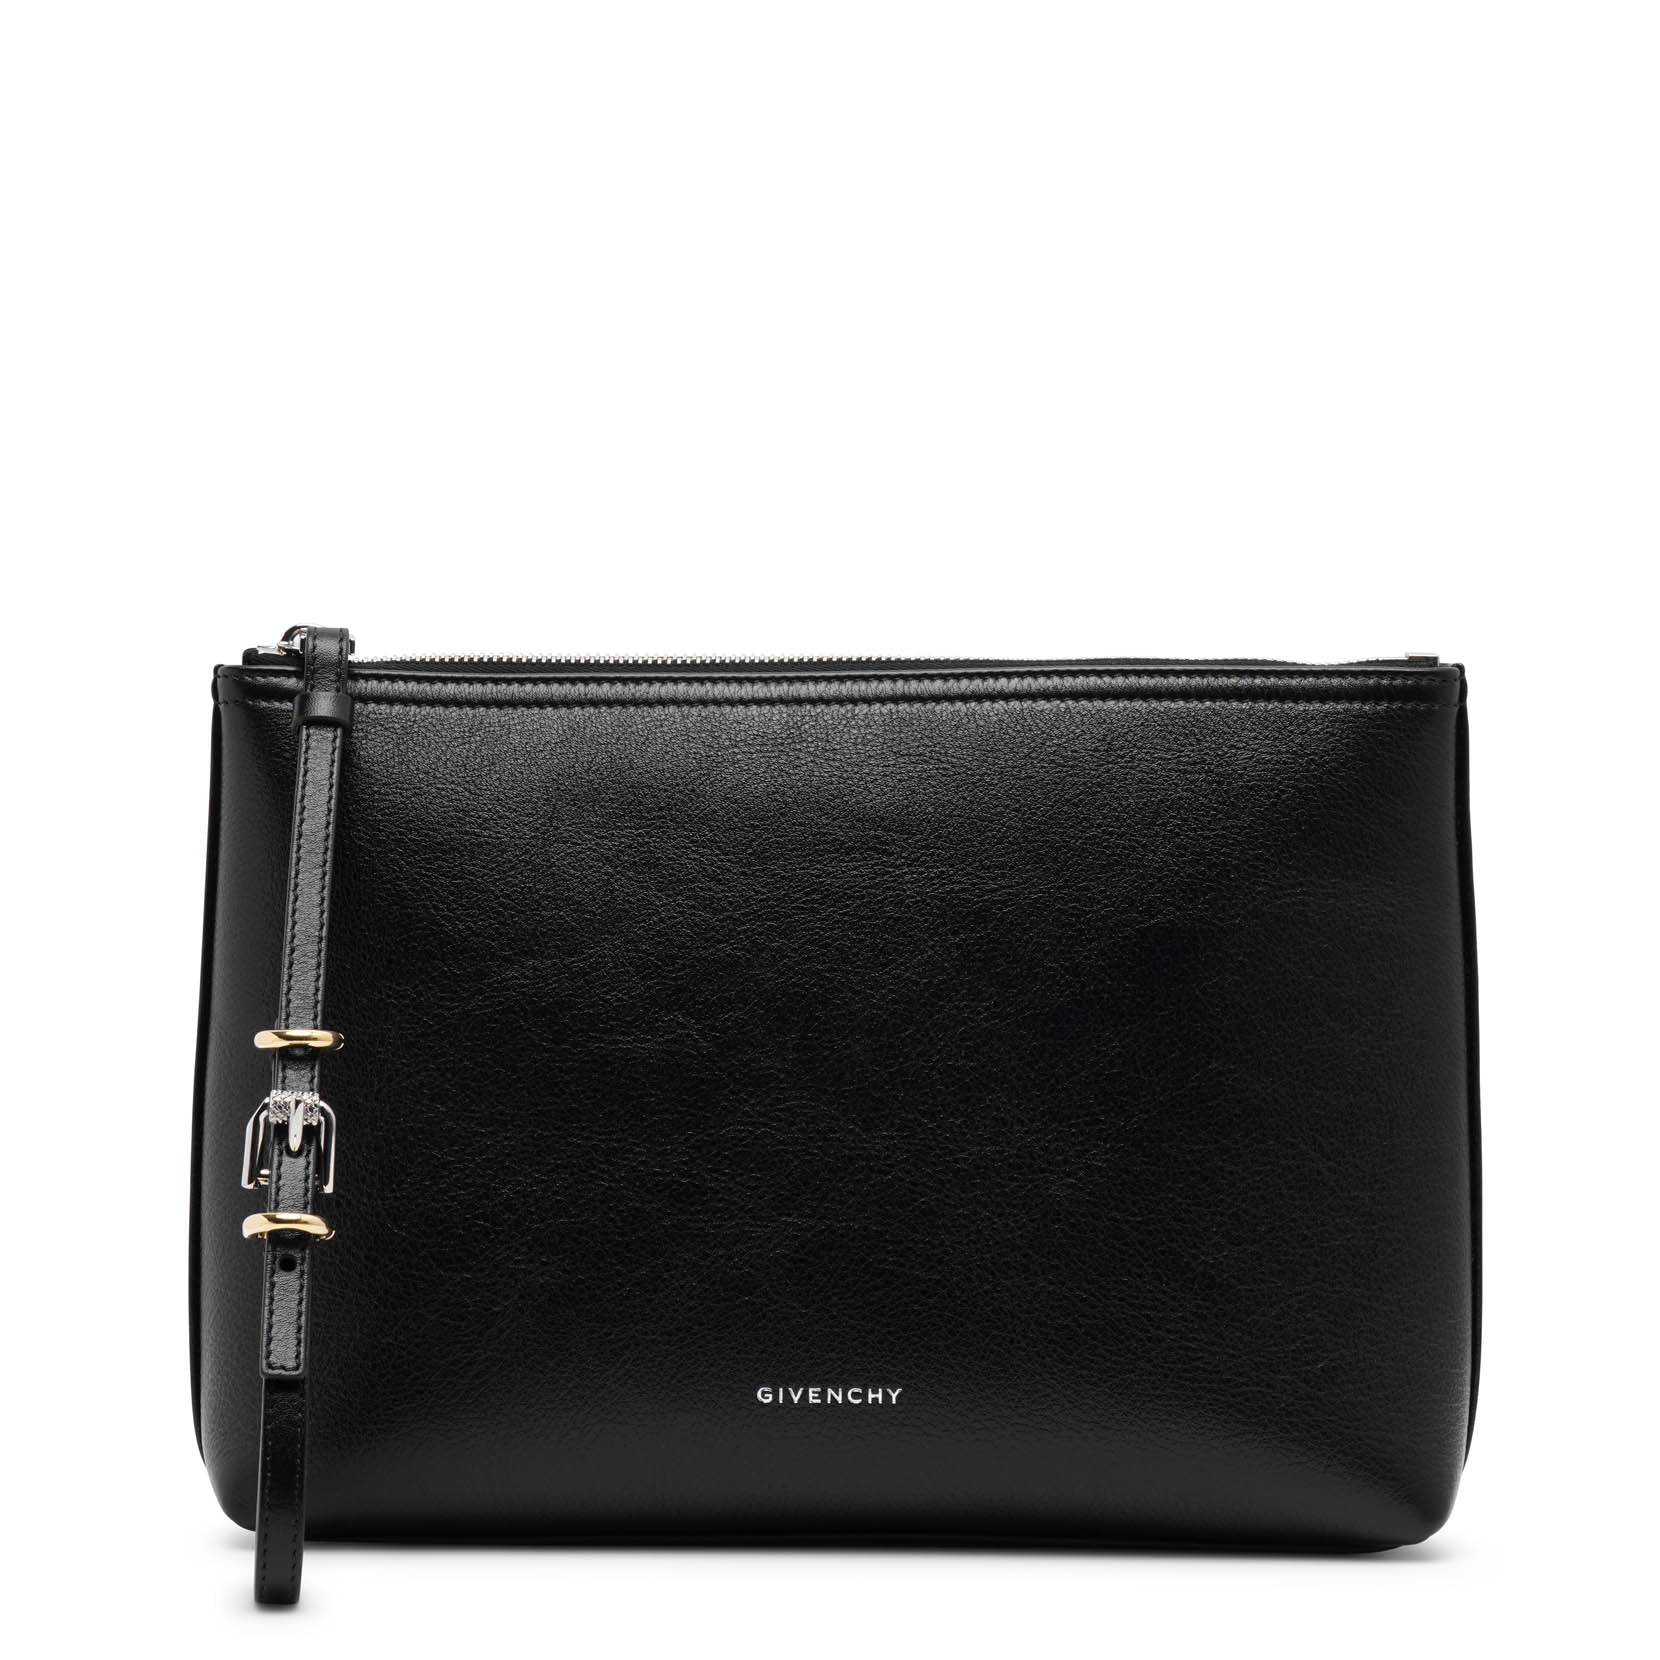 Givenchy Voyou Black Travel Pouch